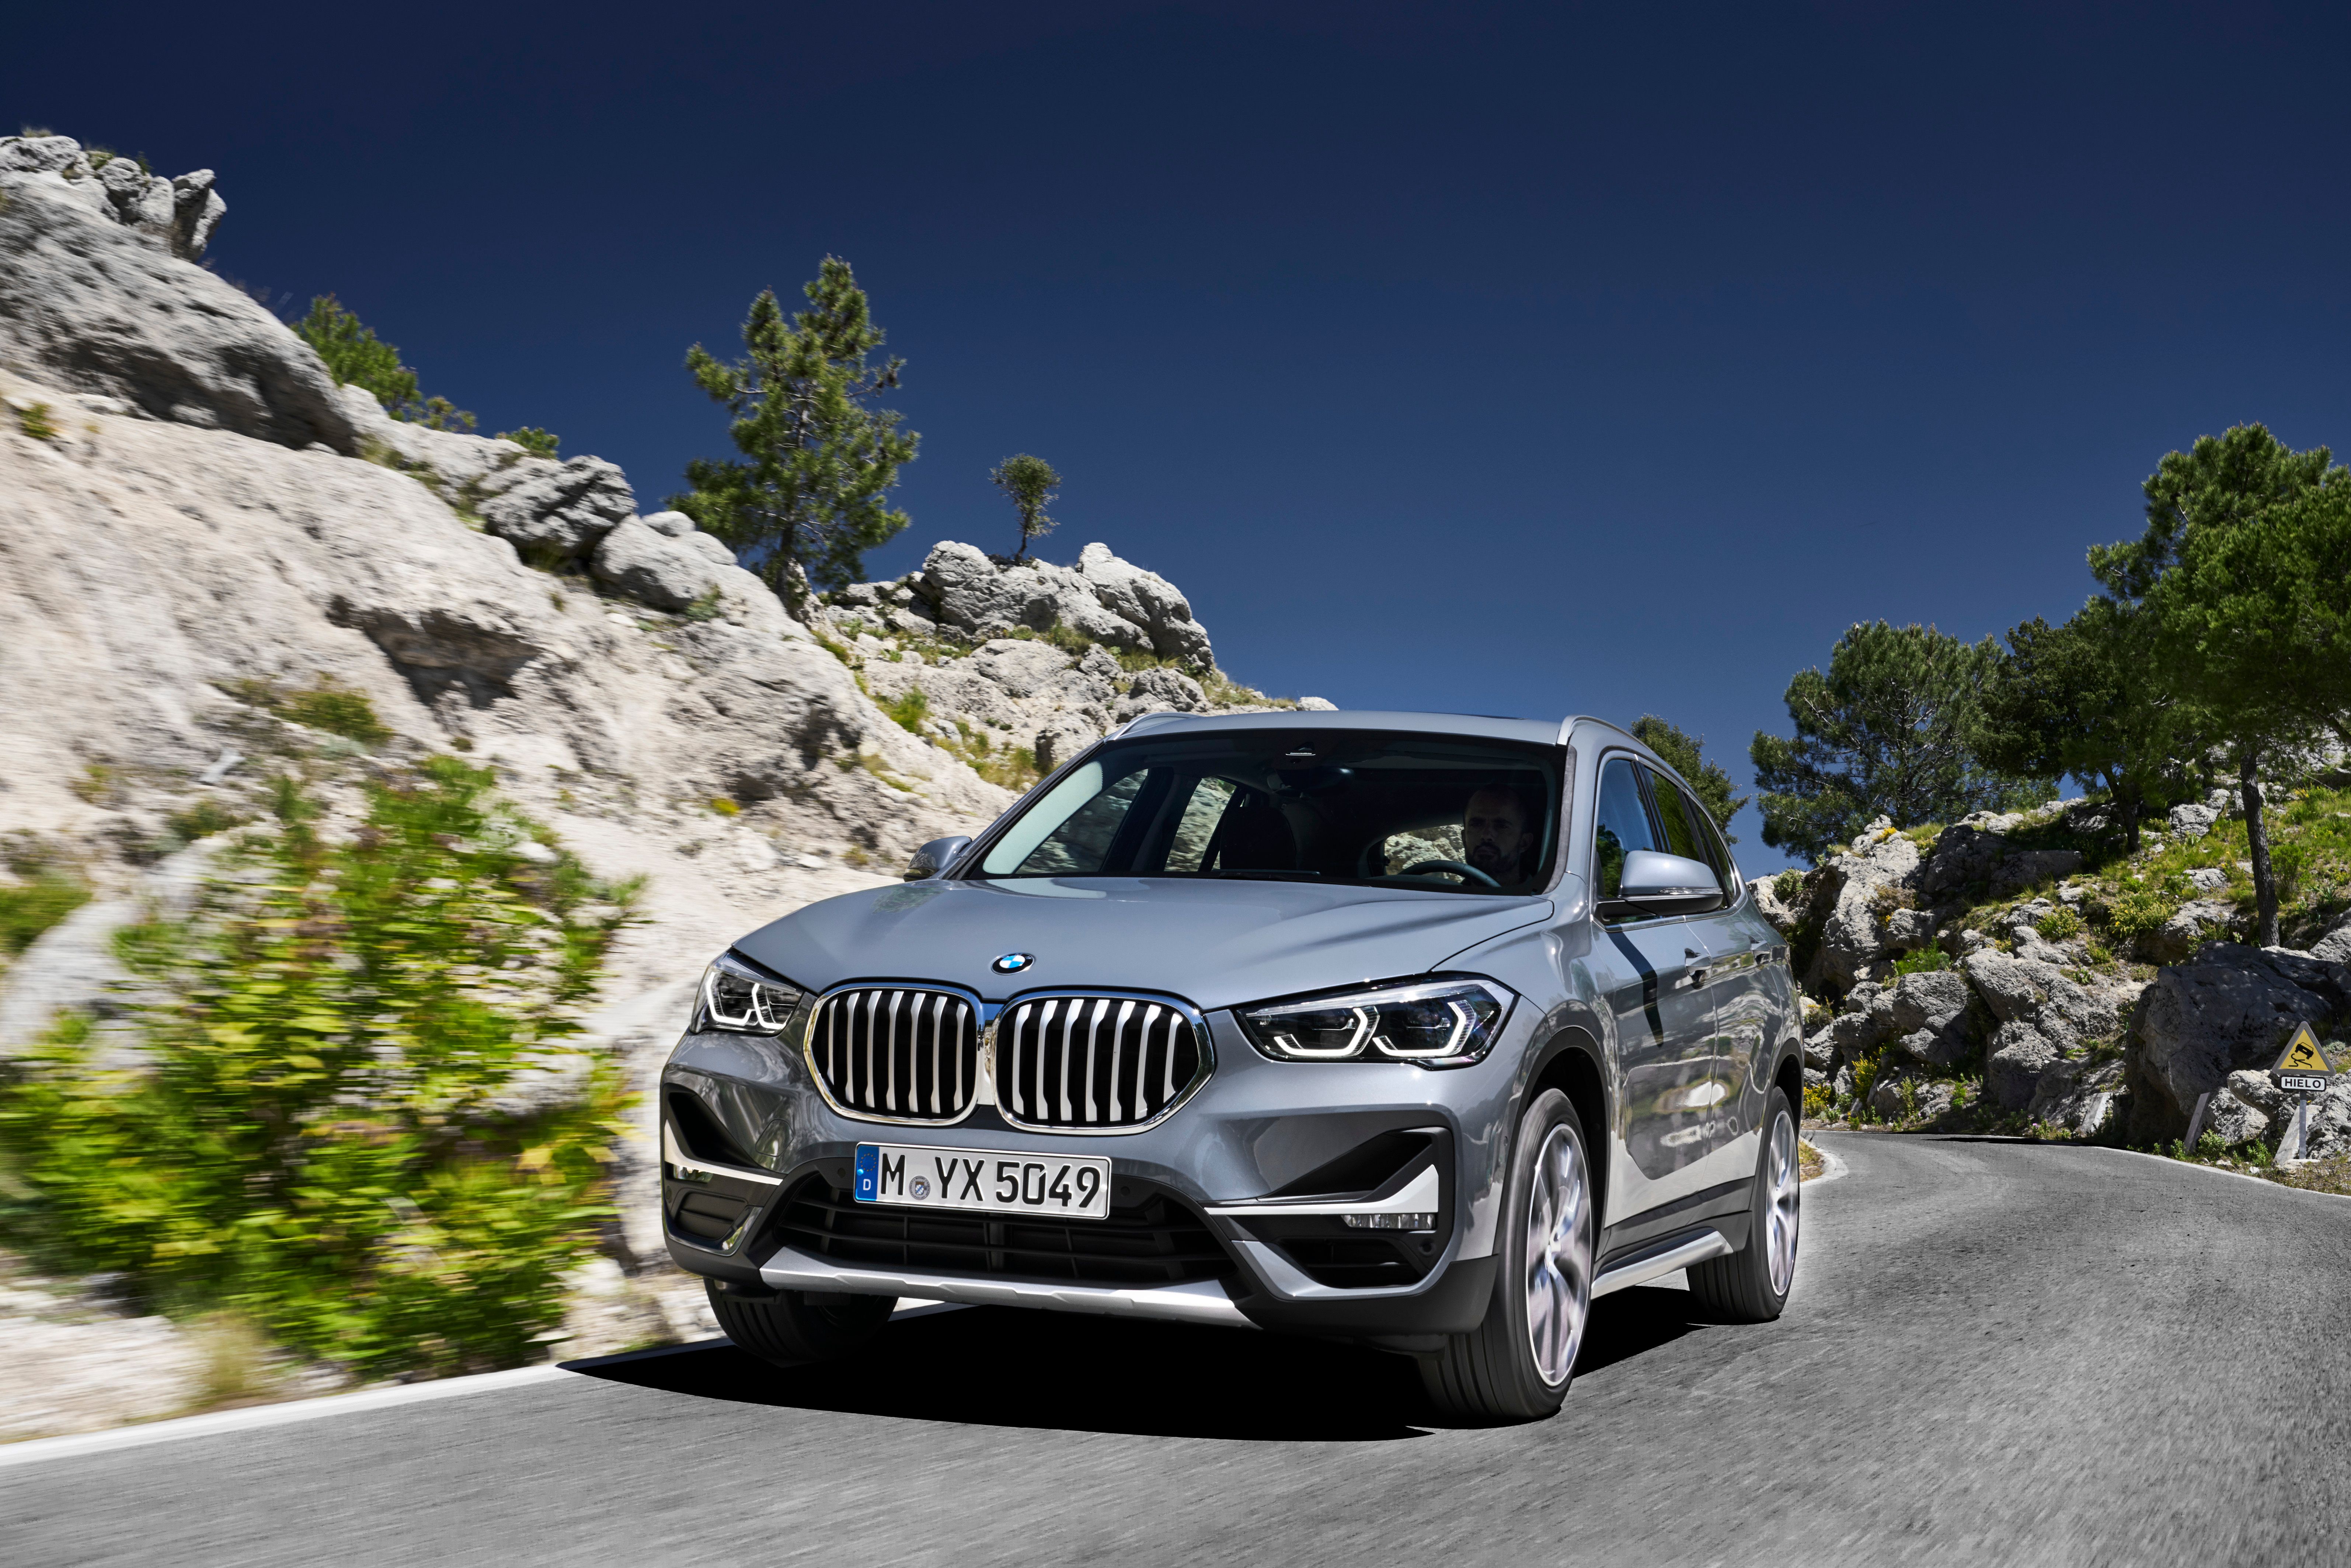 2018 - 2019 The 2020 BMW X1 Has Launched, but Don’t Worry About Rushing to Upgrade